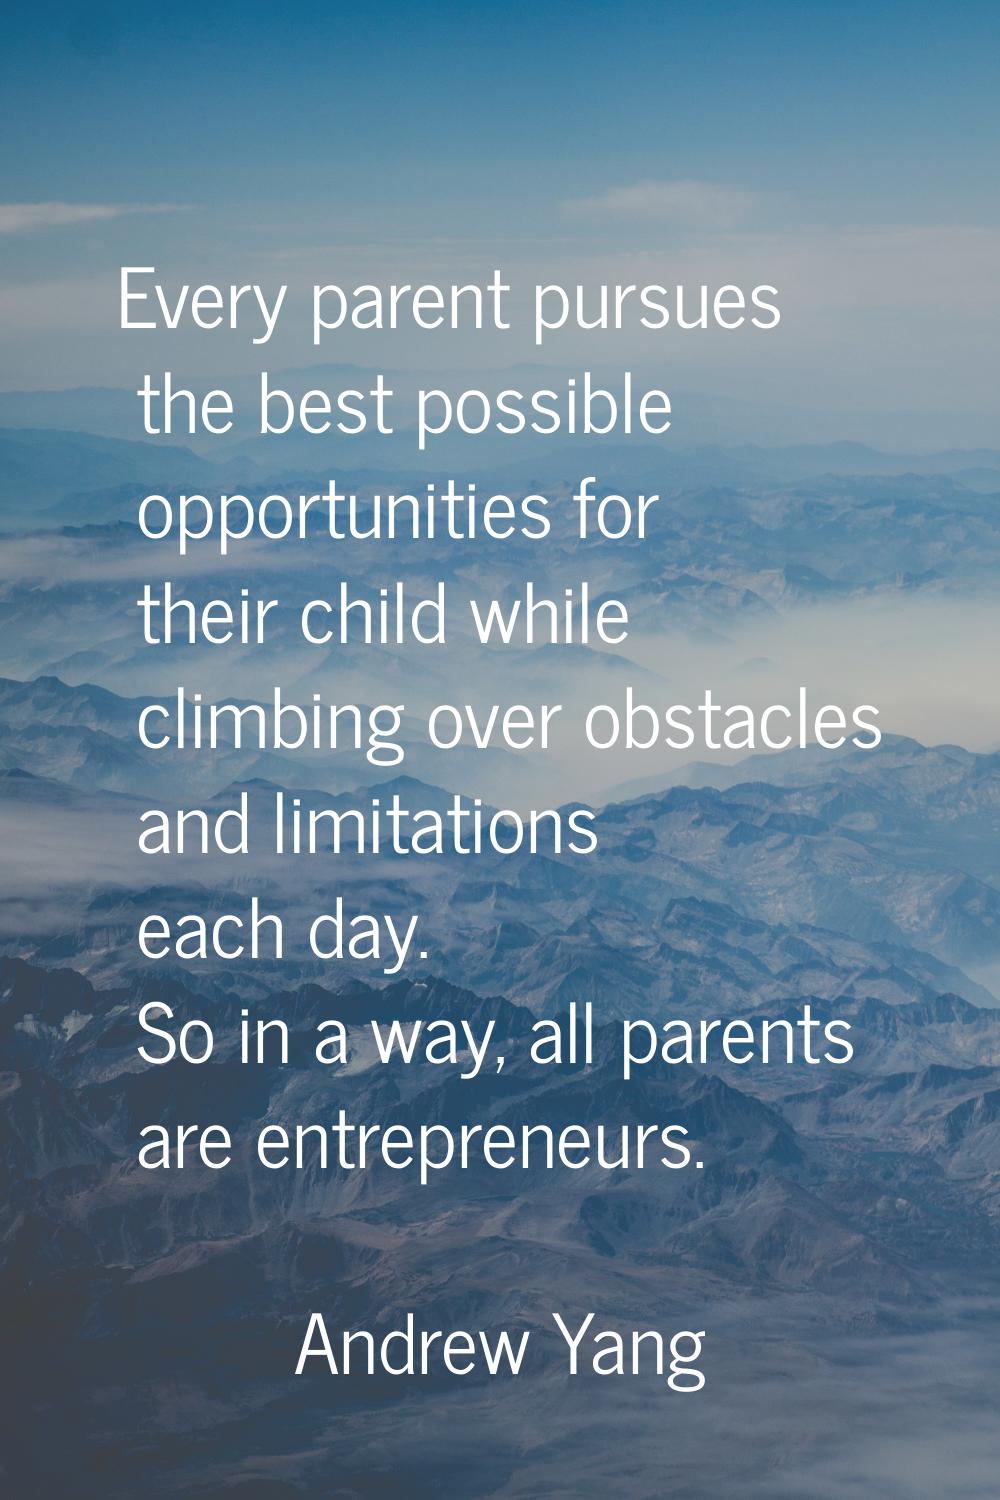 Every parent pursues the best possible opportunities for their child while climbing over obstacles 